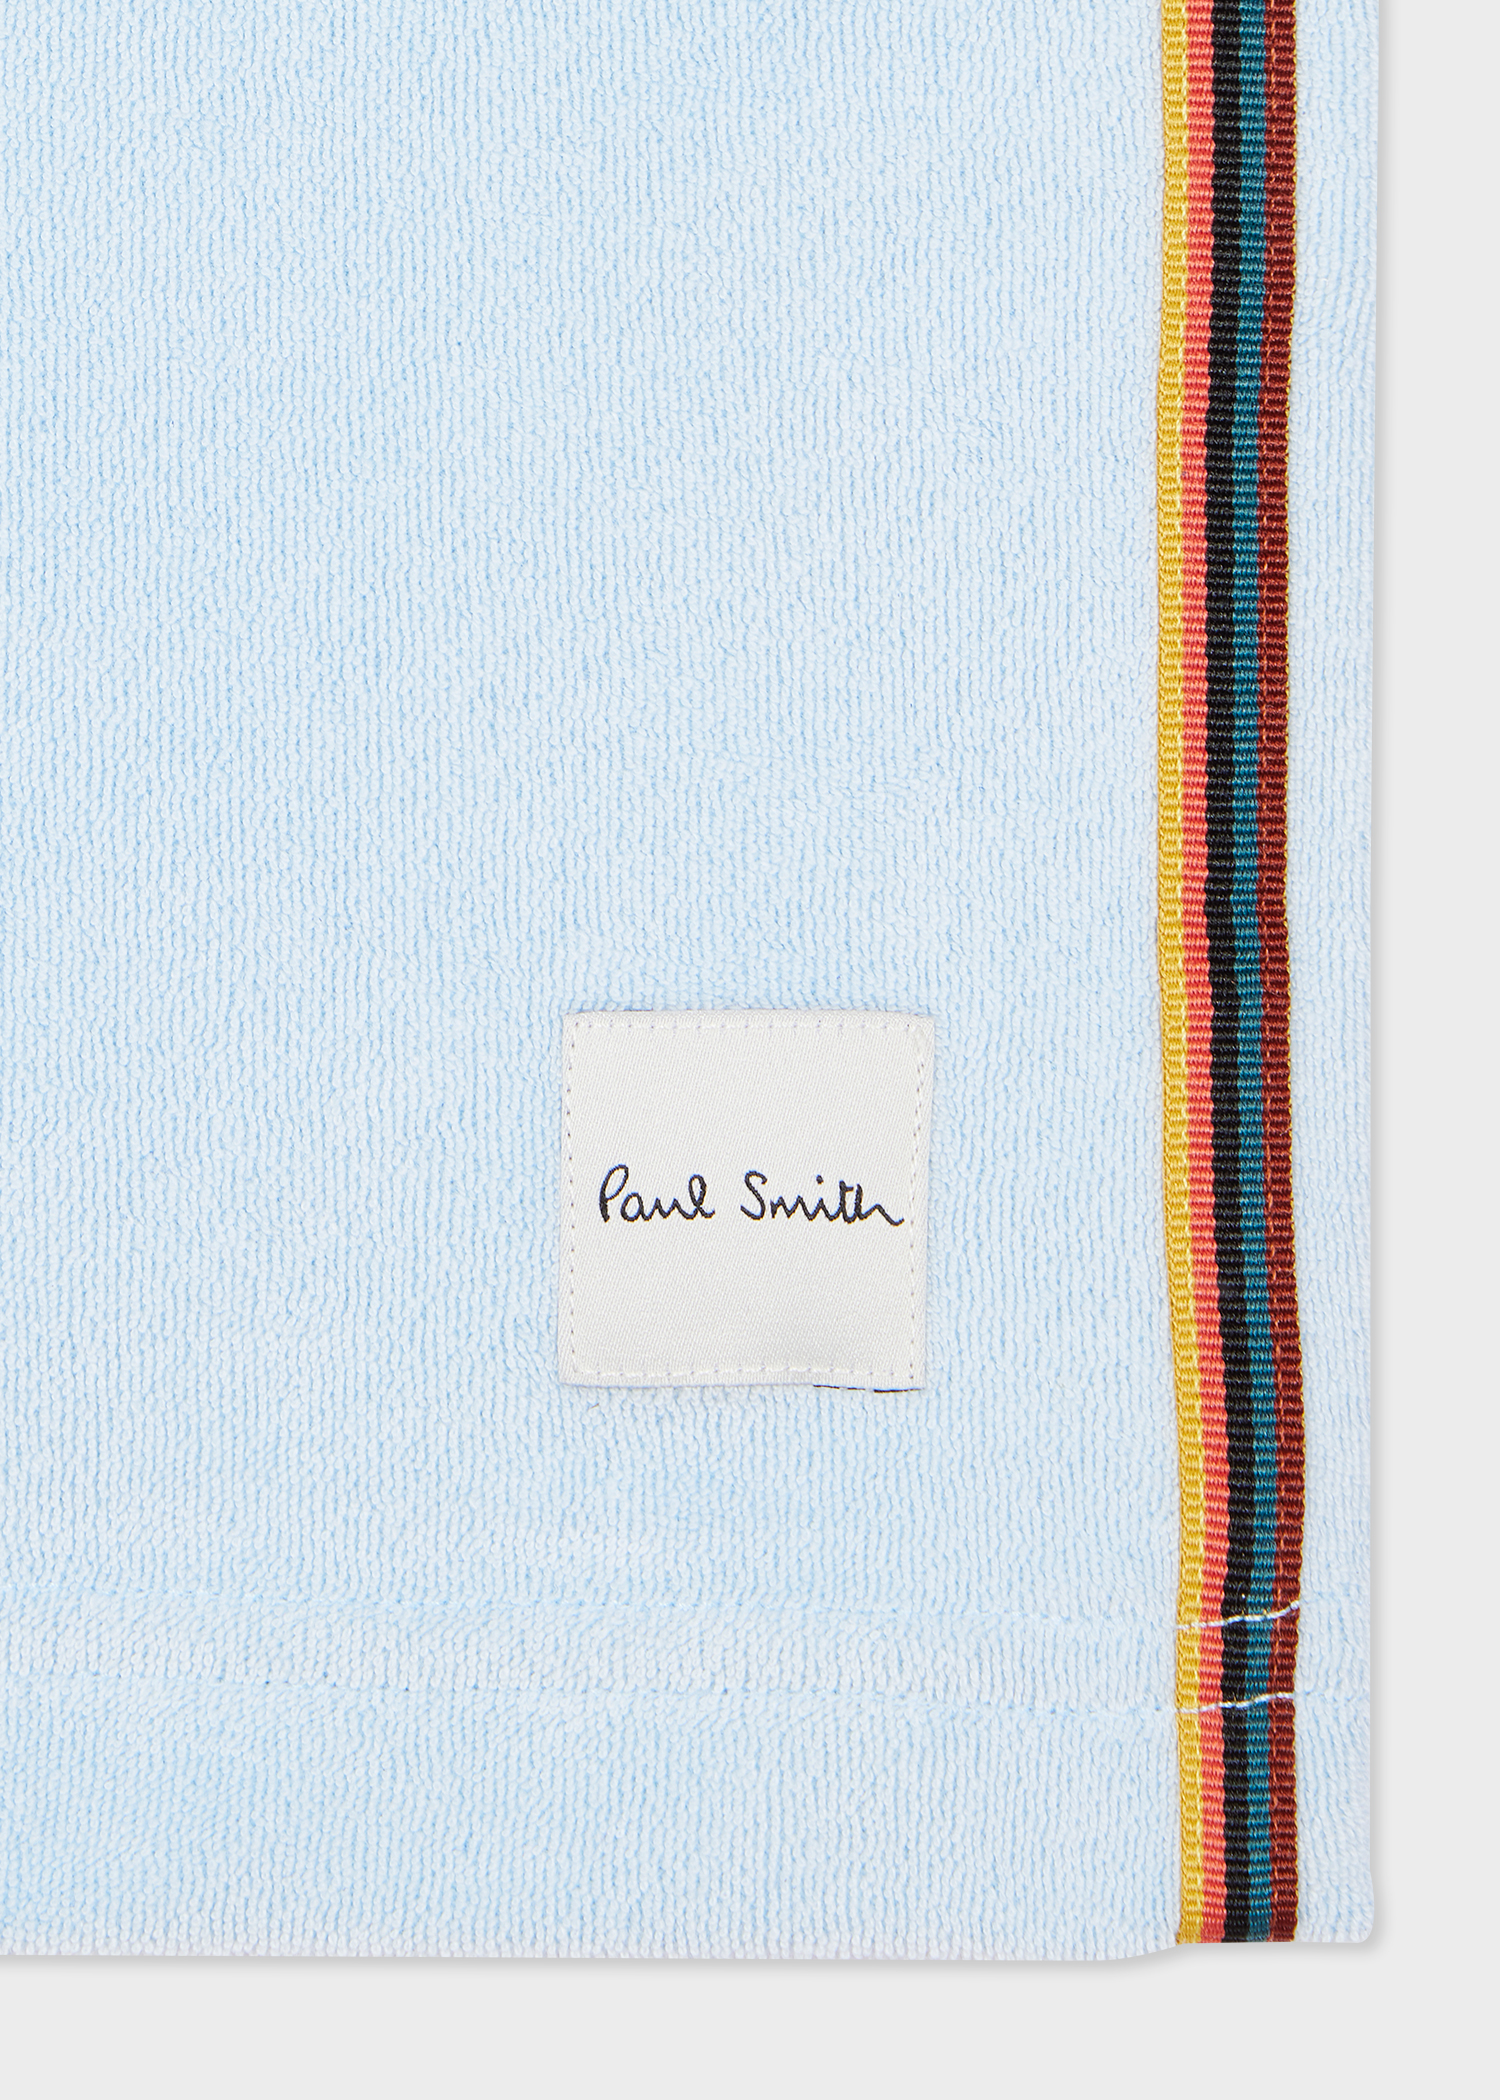 Designer Clothing, Shoes & Accessories | Stripe | Paul Smith